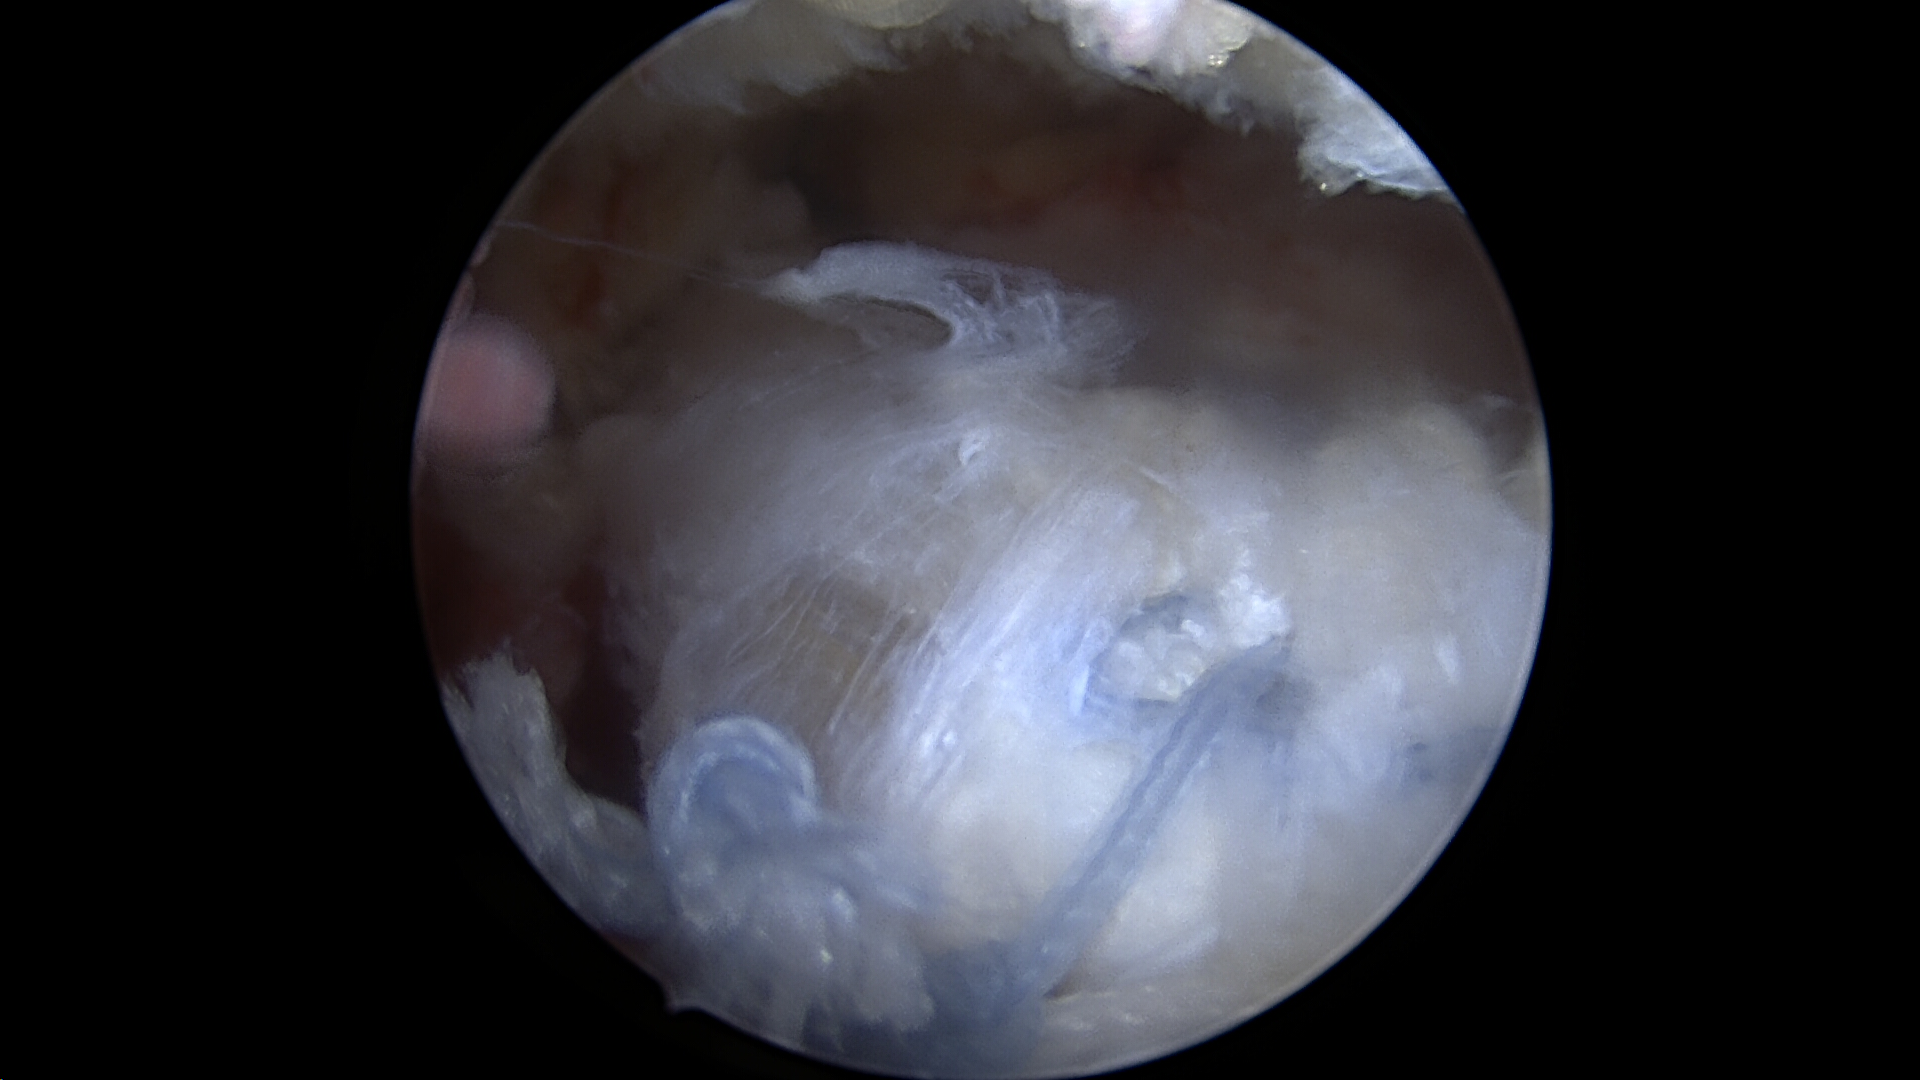 Arthroscopic assisted lower trapezius transfer using Achilles tendon allograft viewed from the lateral portal of the prior irreparable massive rotator cuff tear